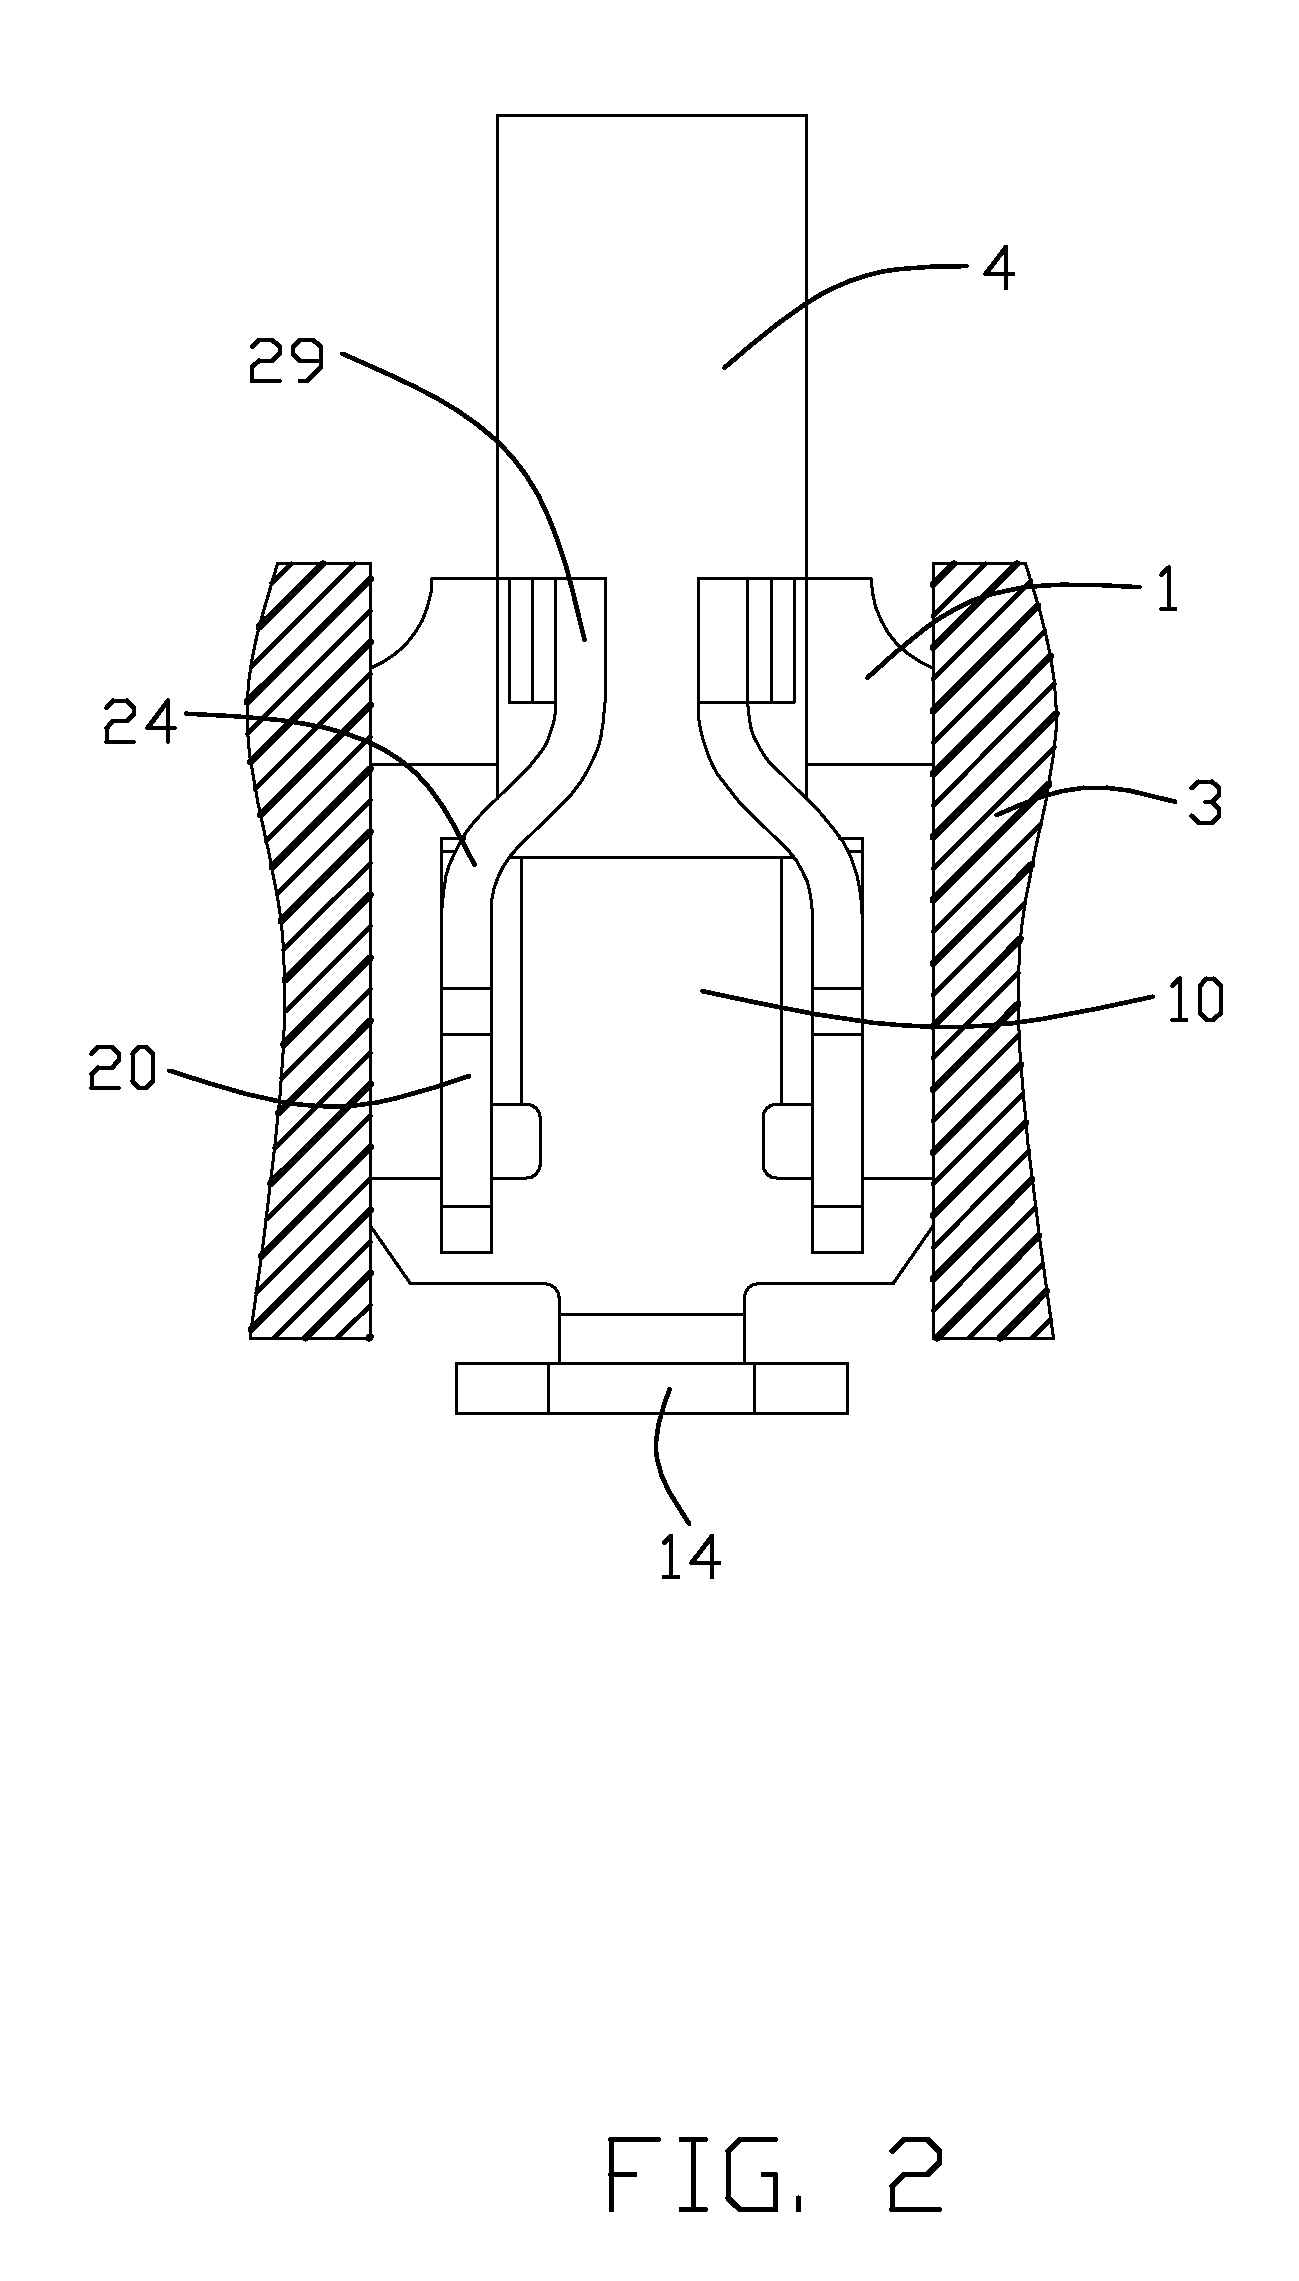 Socket connector having contact terminals with reliable and durable interconnection with pin legs of a CPU